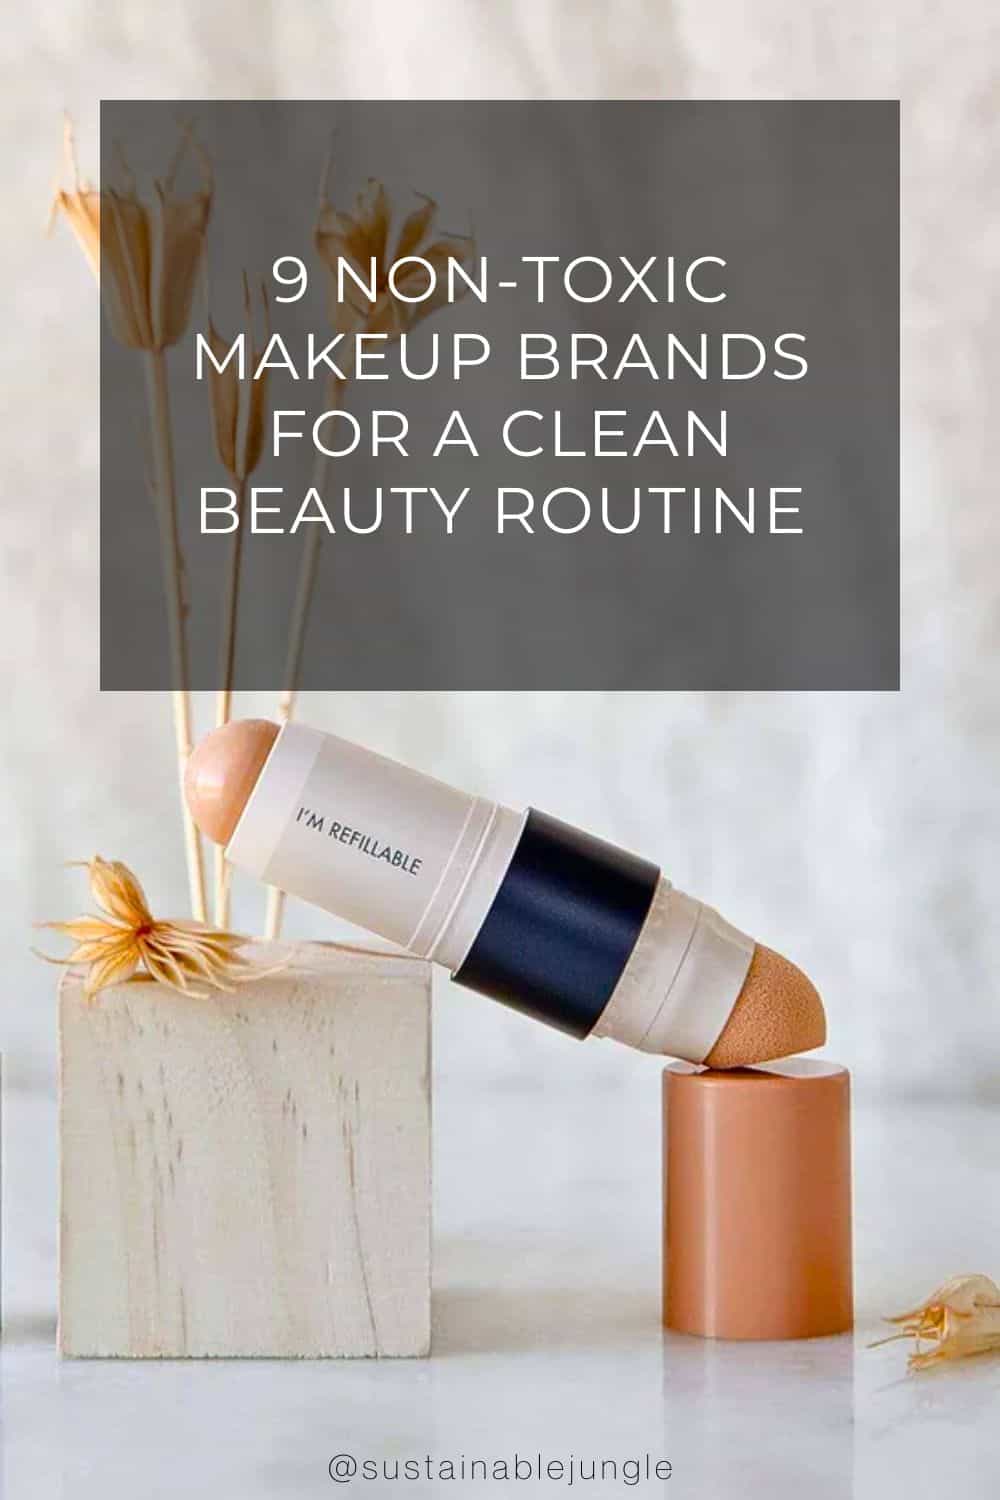 9 Non-Toxic Makeup Brands For A Clean Beauty Routine Image by zerowastestore.com #nontoxicmakeup #nontoxiccosmetics #nontoxicmakeupbrands #cleanmakeupbrands #bestnontoxicmakeup #cleanestmakeupbrands #sustainablejungle